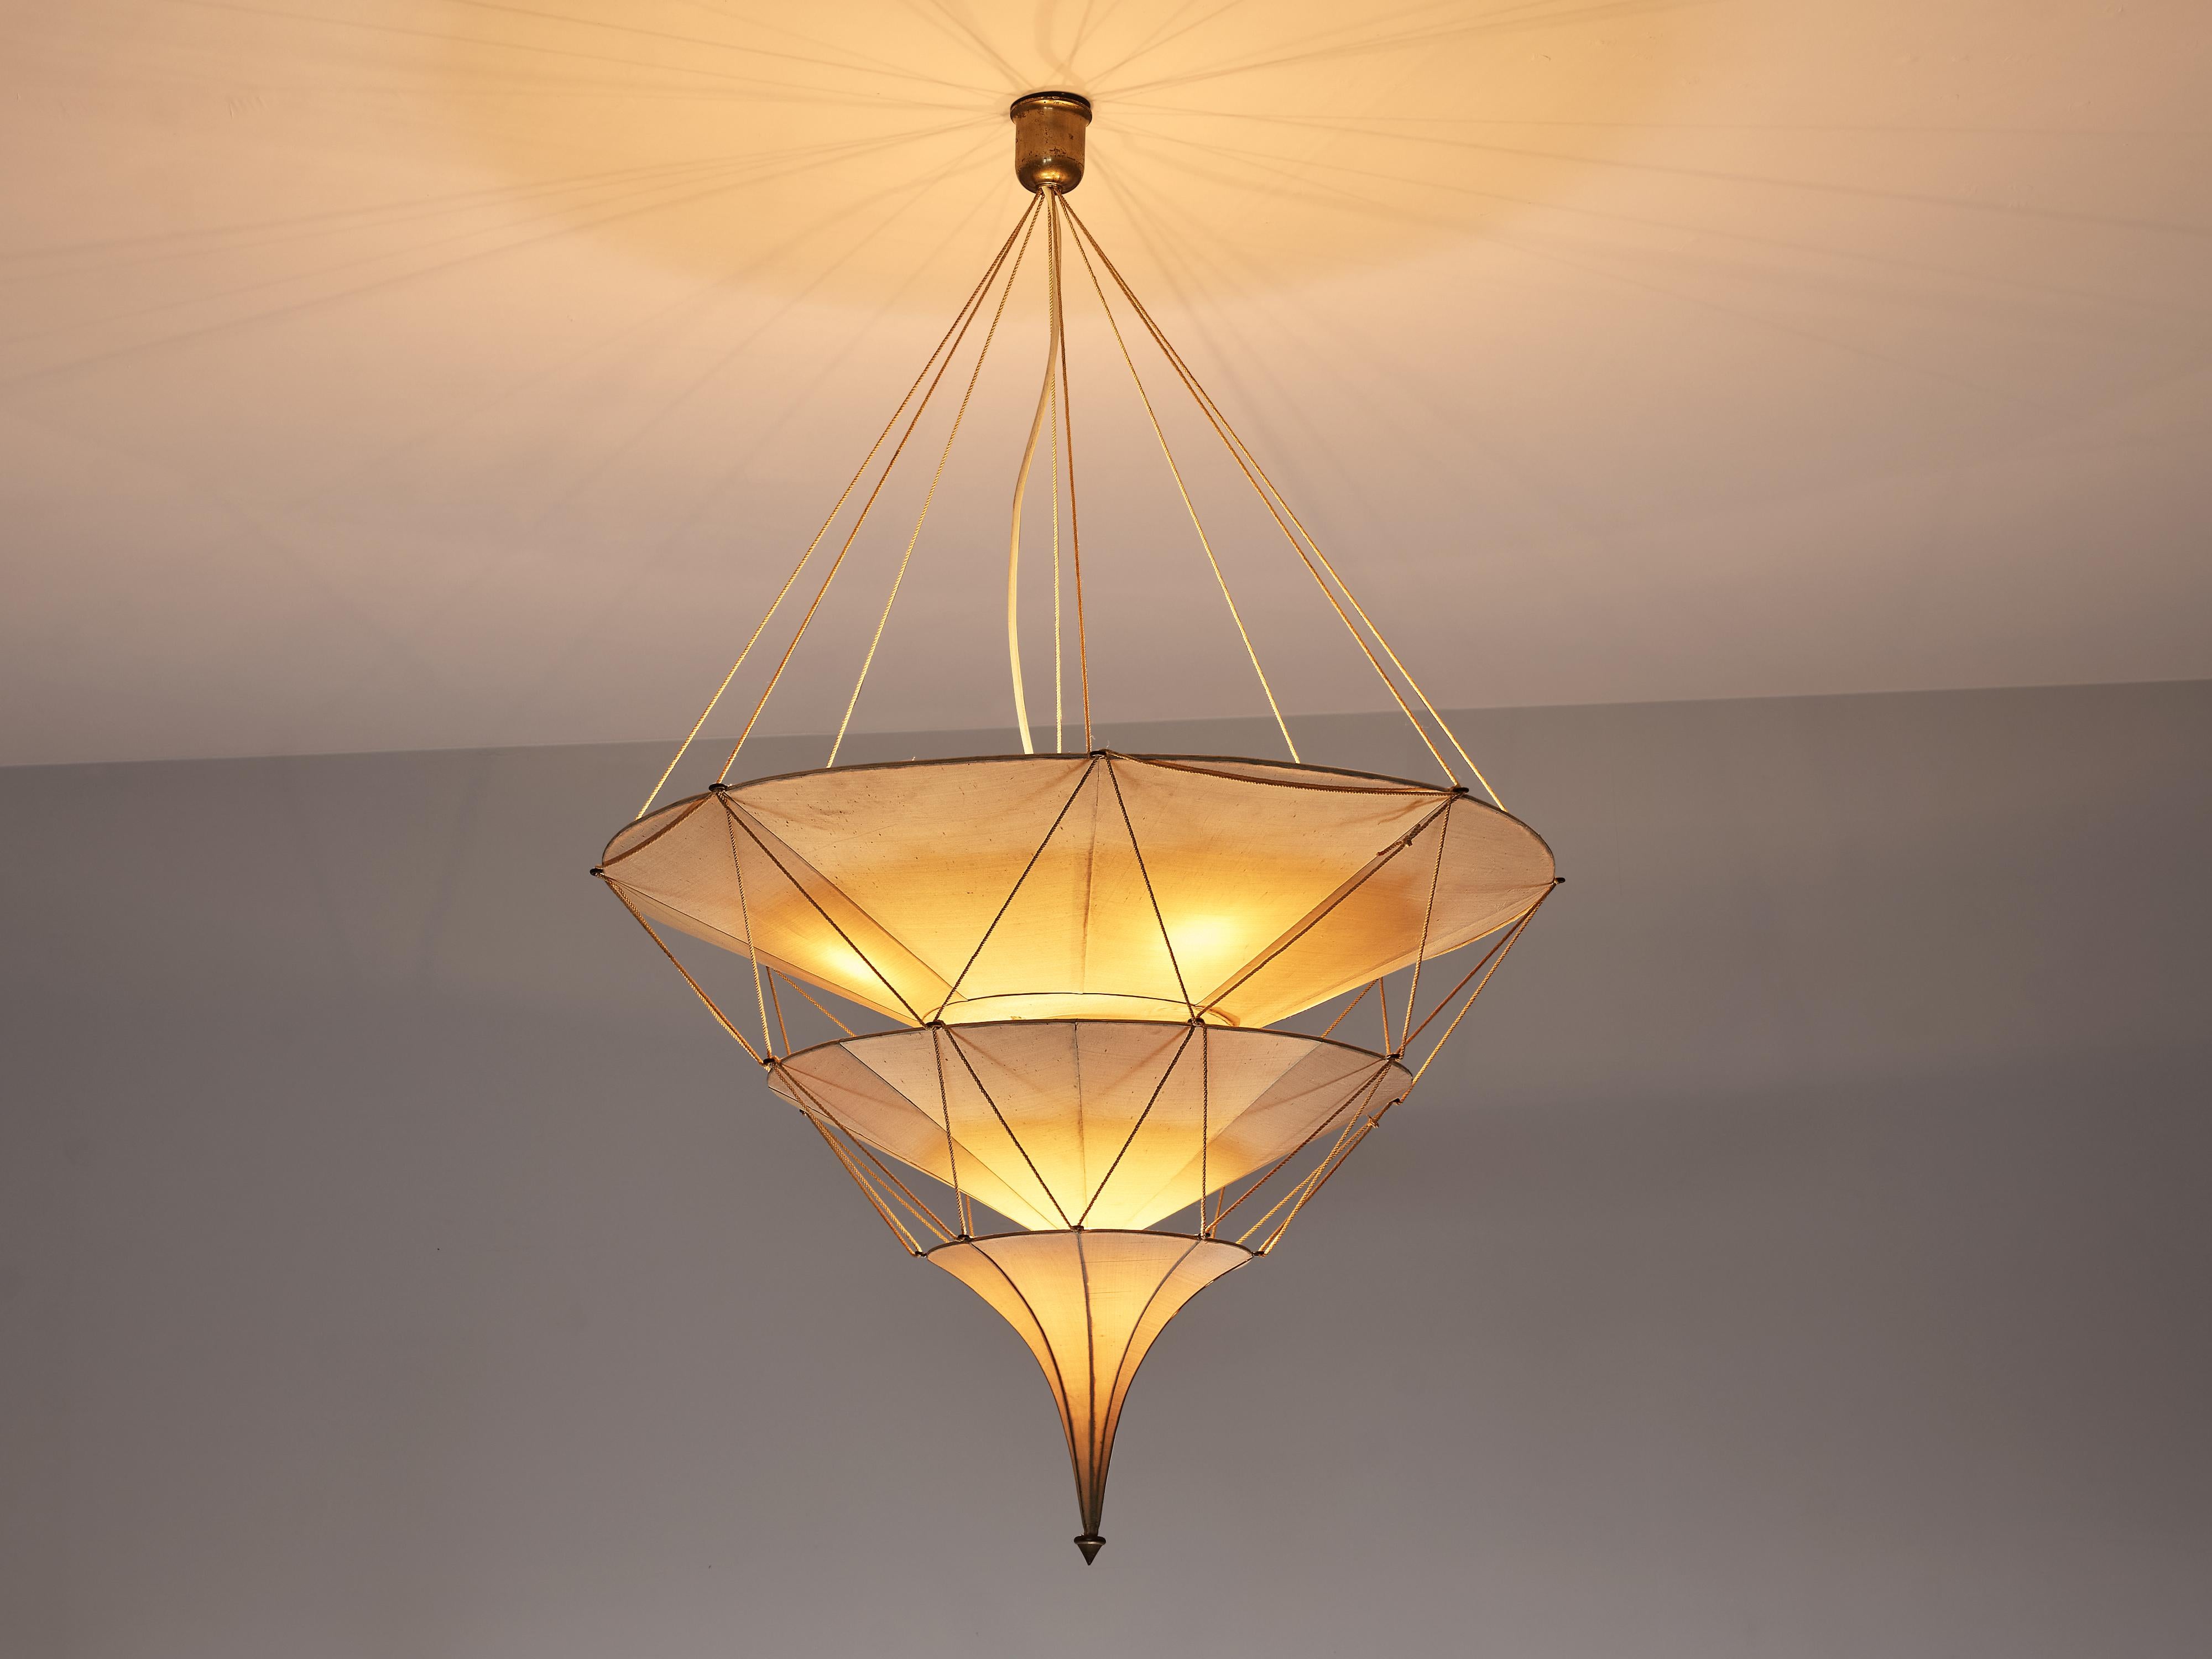 Mariano Fortuny, chandelier ‘Icaro’, silk, fibre, metal, brass, cord, Italy, designed 1920s

This elegant ‘Icaro’ chandelier by Mariano Fortuny was designed around 1920. It has a theatrical expression and atmospheric light. Three layers of shades